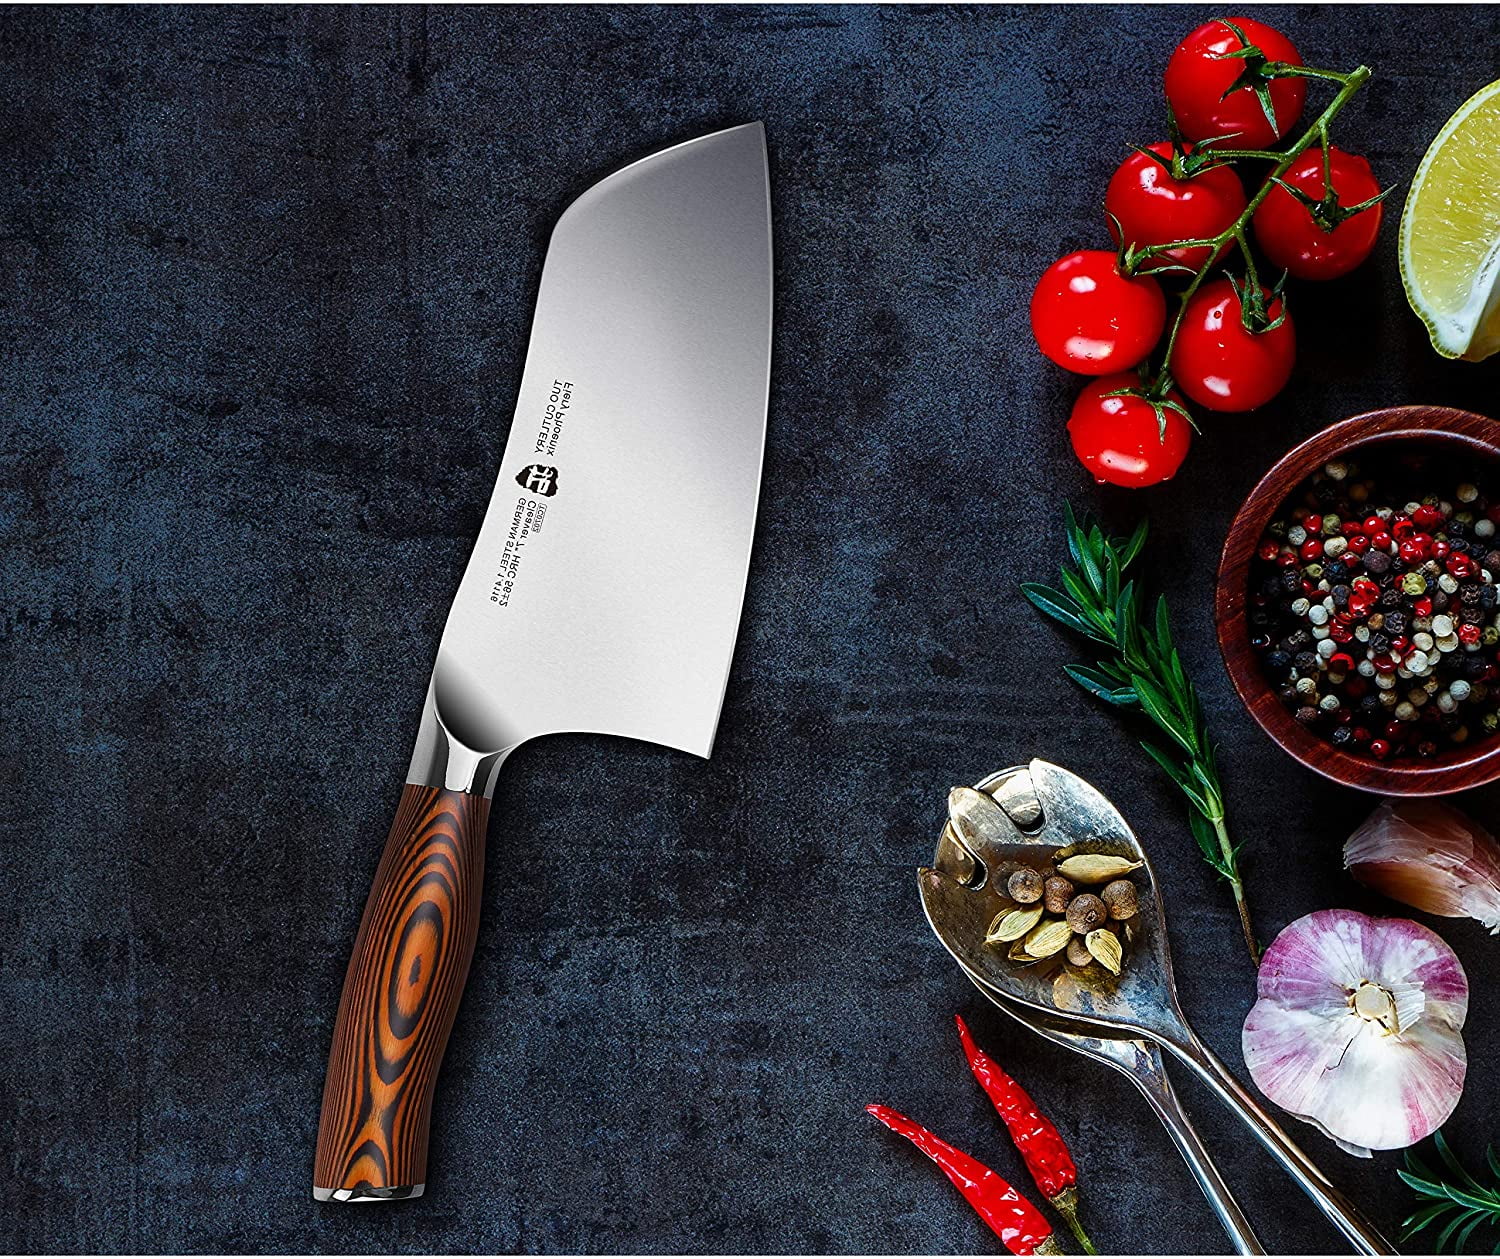 ChopMaster Full Tang Forged Kitchen Knife Set Chinese Butcher, Cleaver,  Utility & Chef Knives For Meat & Vegetables Stainless Steel Handmade Blade  With Razor Sharp Edge & Ergonomic Handle. From Friend1205, $19.3